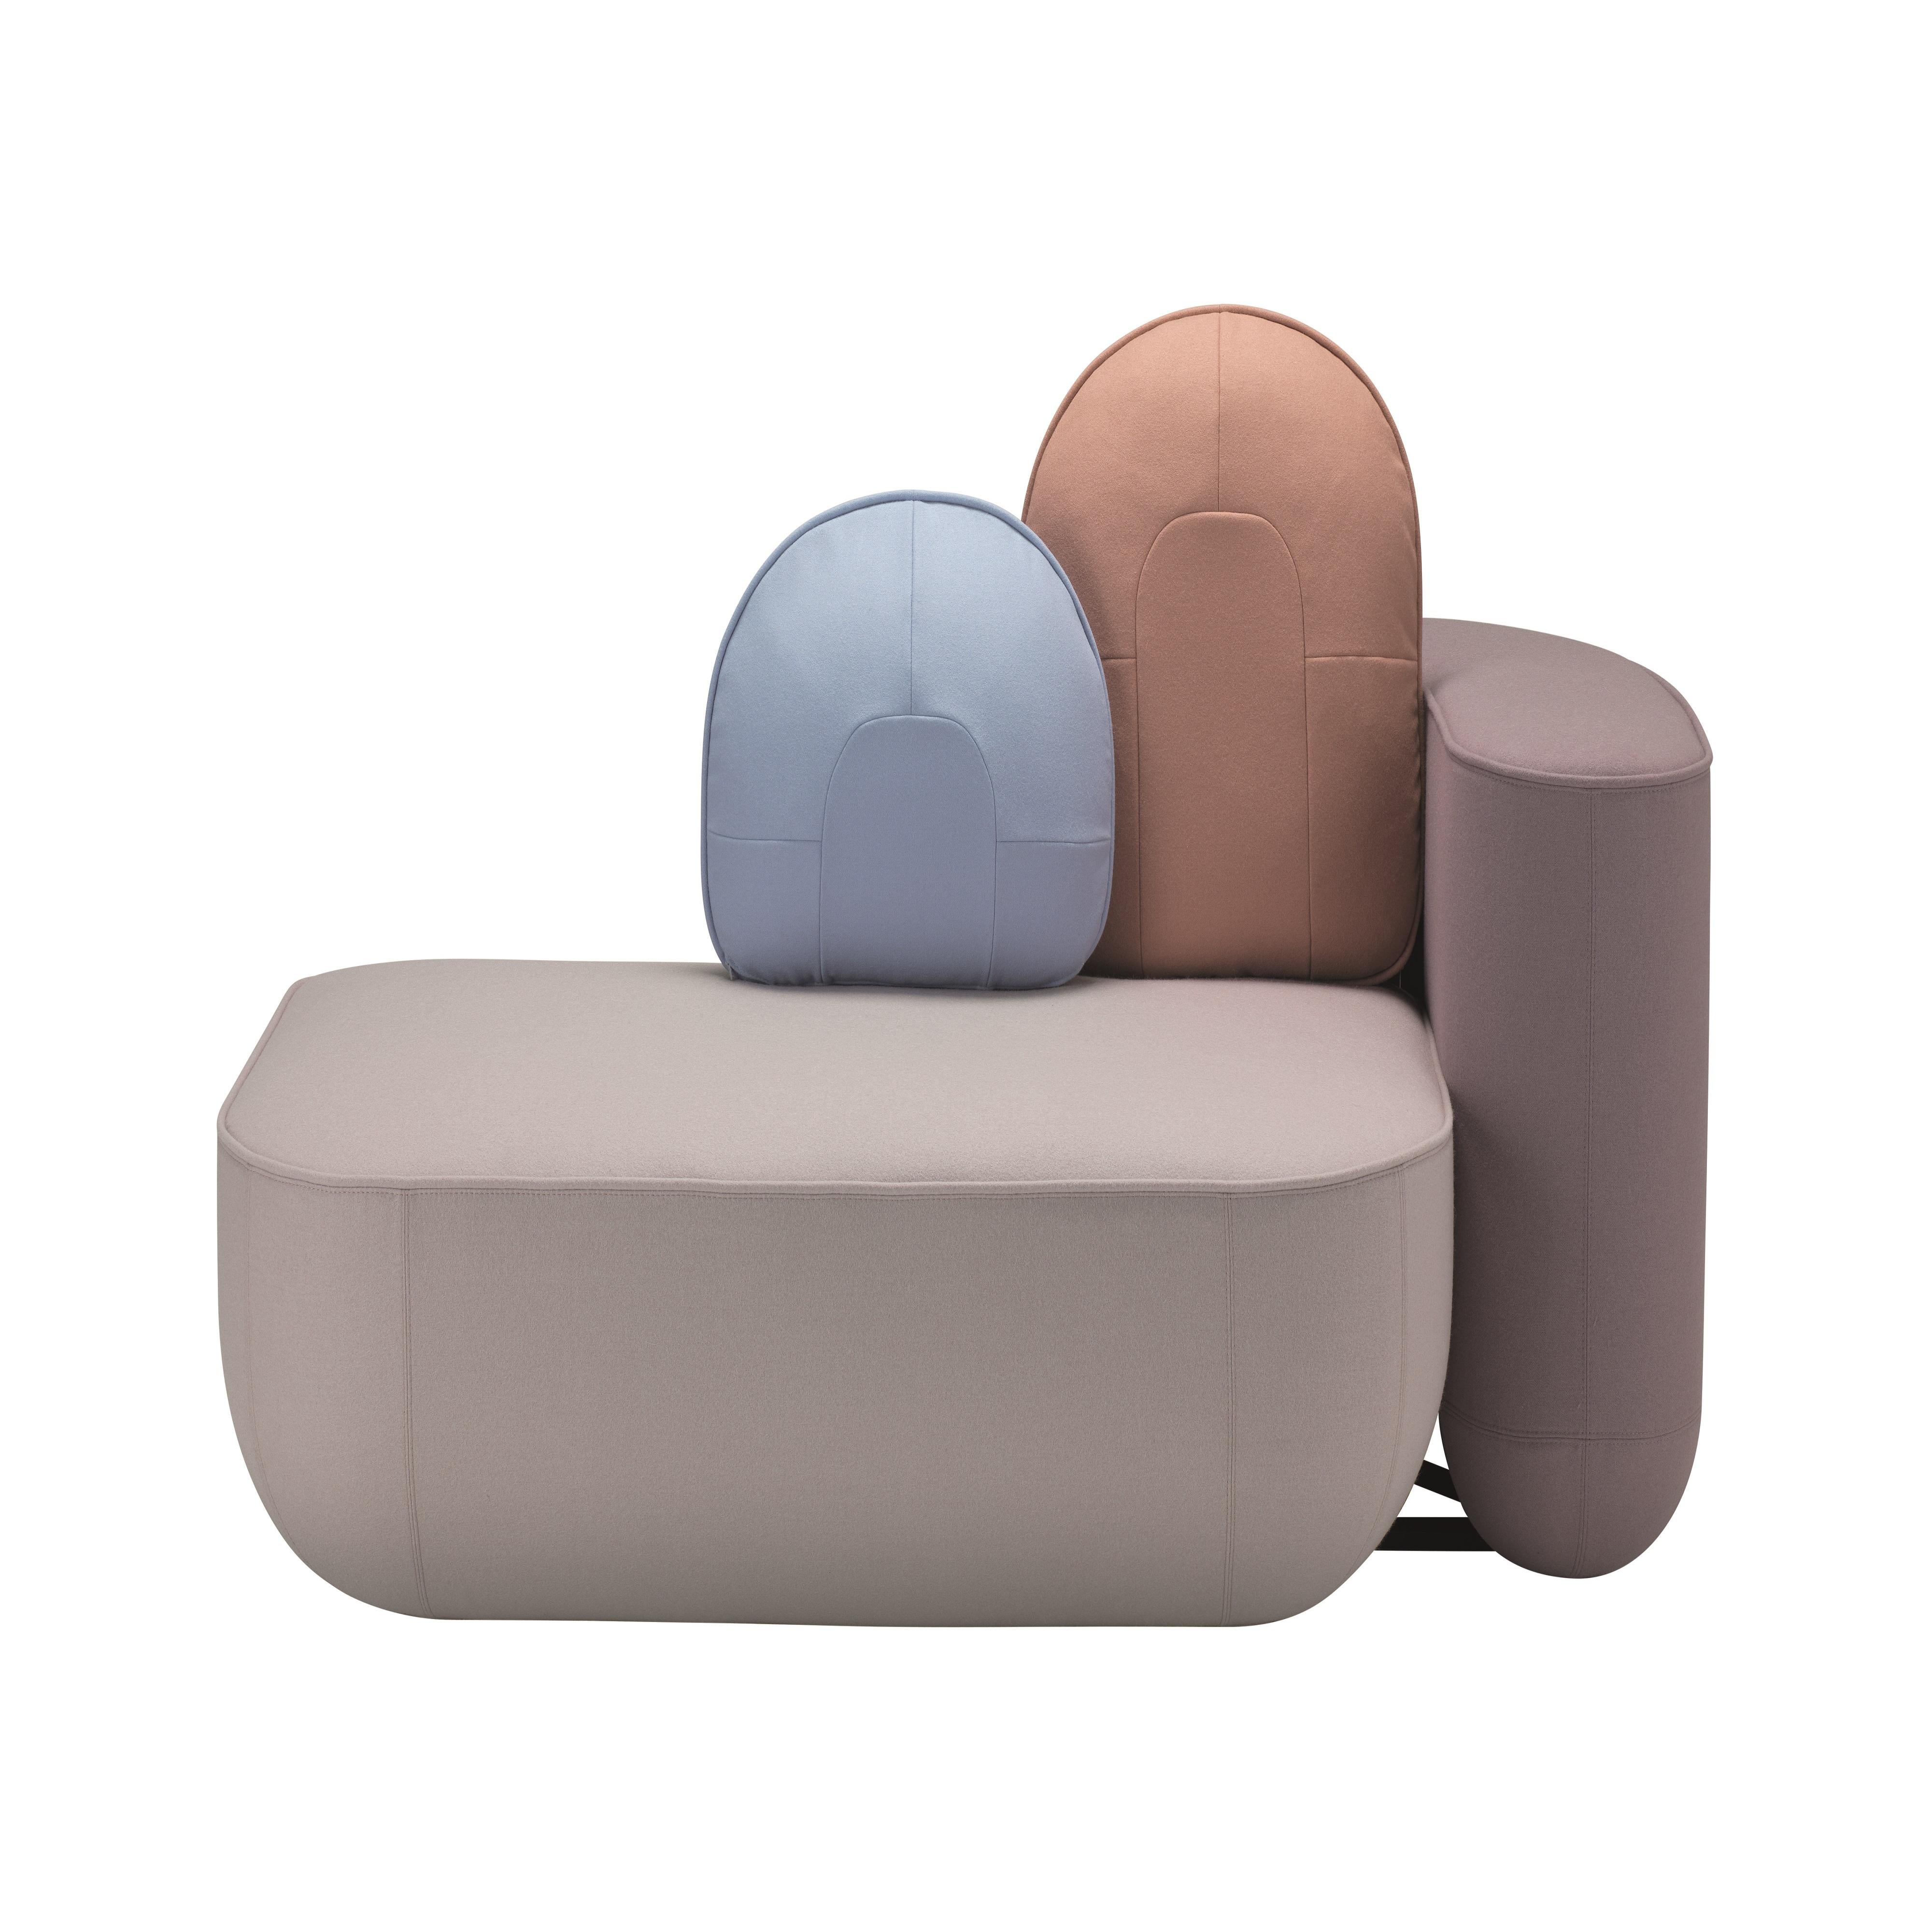 Alias Okome Sofa Ending 74 SX in grey and Beige Upholstery by Nendo

Two-seater composition with removable cover, covered in eco leather Serge Ferrari®, Alias®, Camira® fabric or Kvadrat® fabric or Pelle Frau® leather.

Oki Sato, Chief Designer